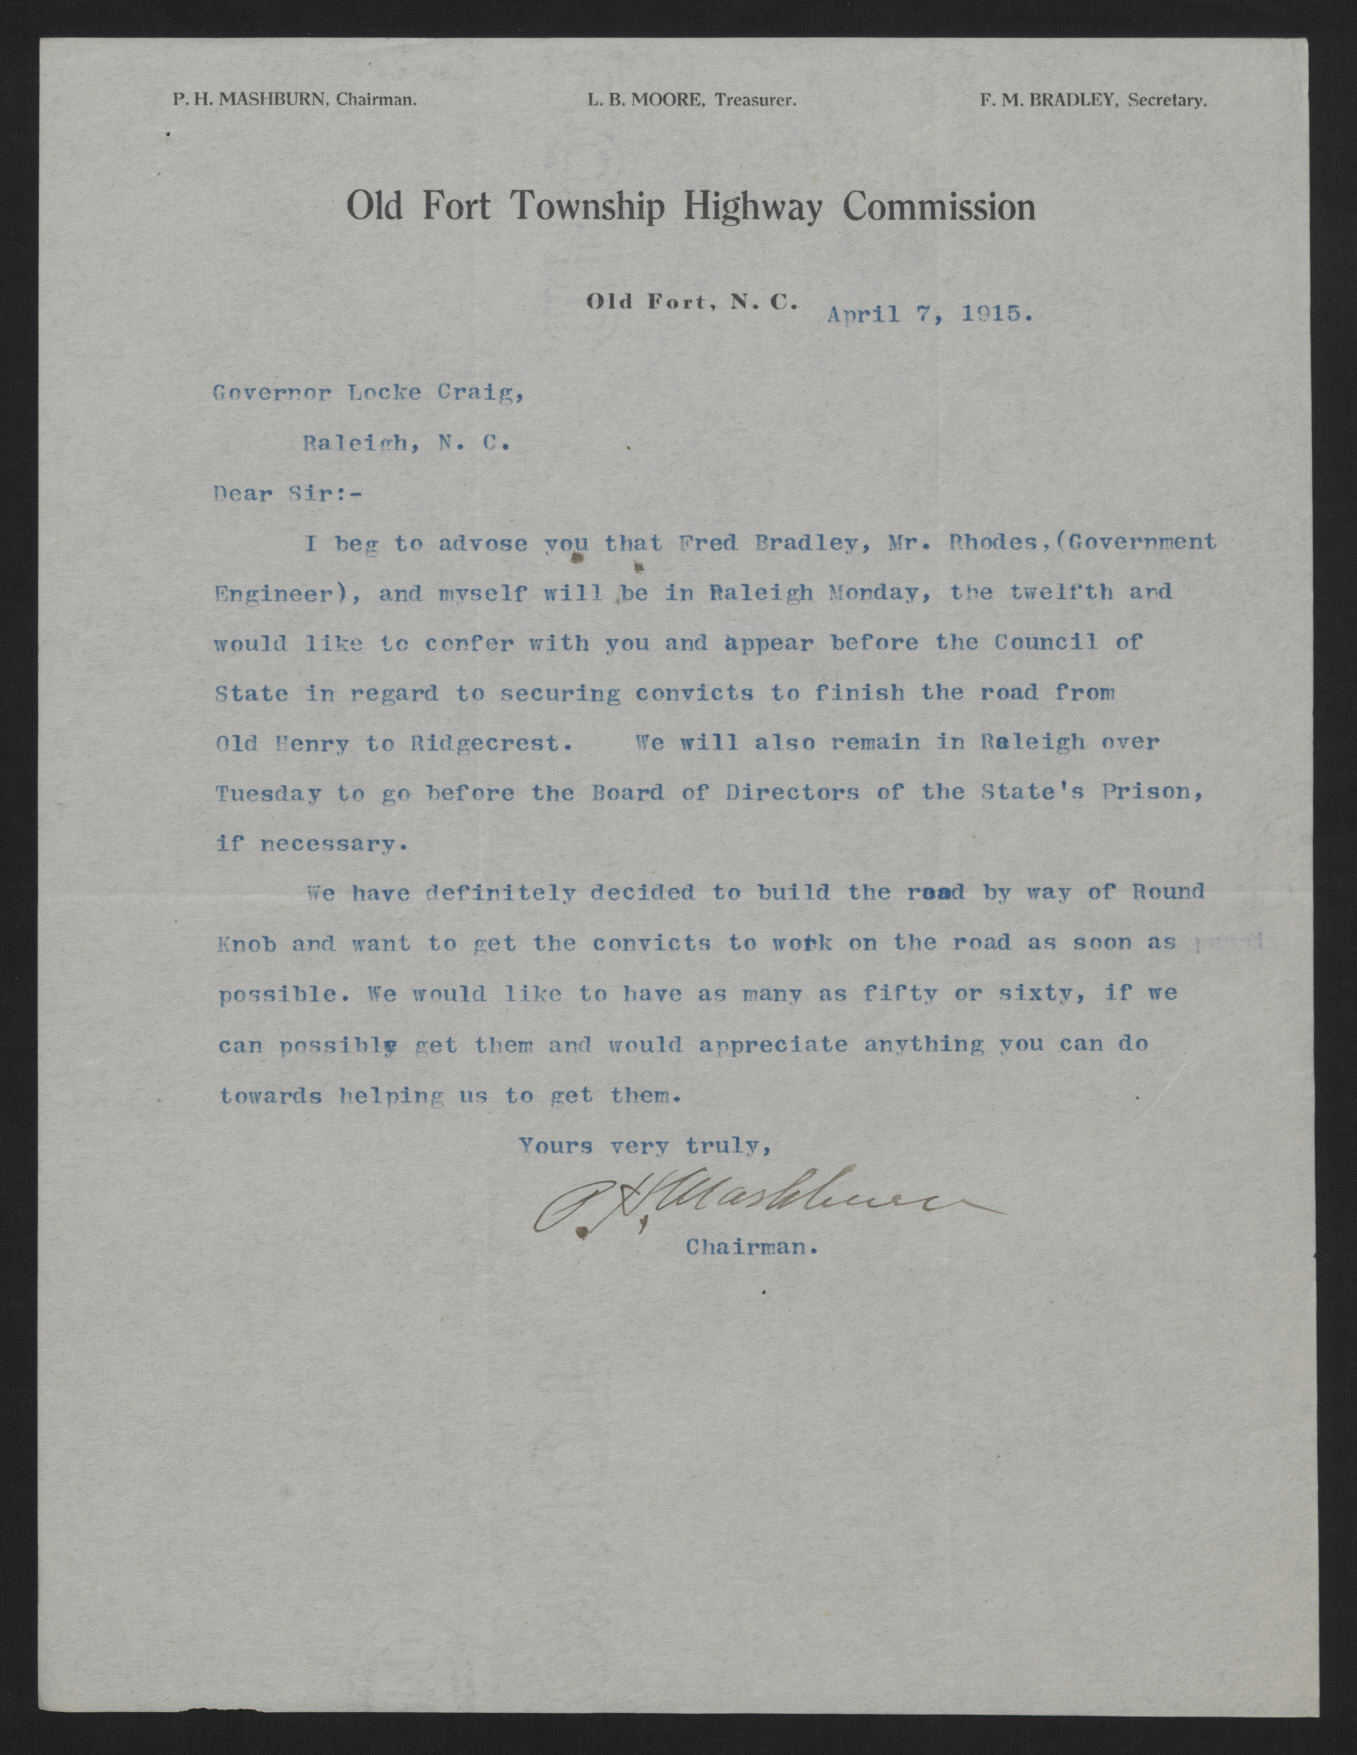 Letter from Mashburn to Craig, April 7, 1915